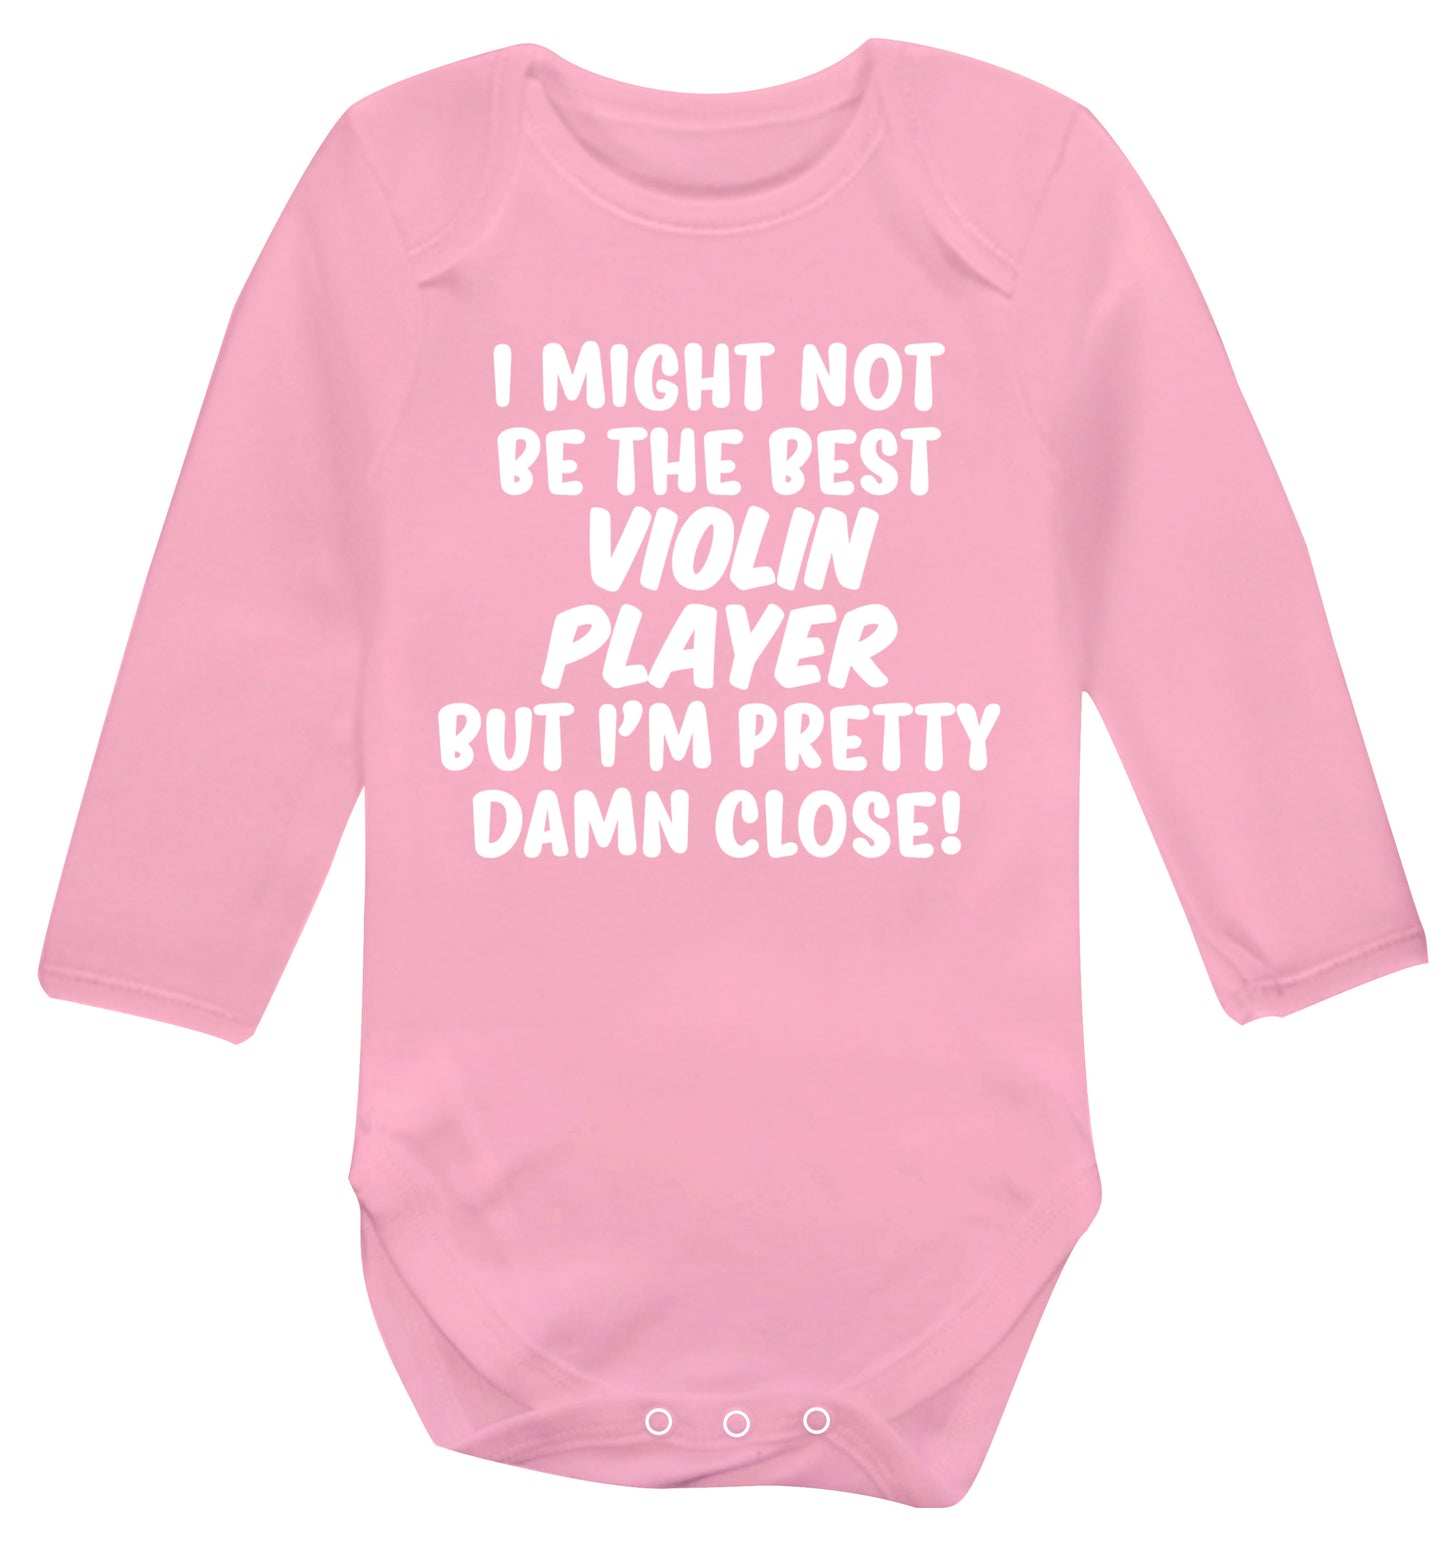 I might not be the best violin player but I'm pretty close Baby Vest long sleeved pale pink 6-12 months